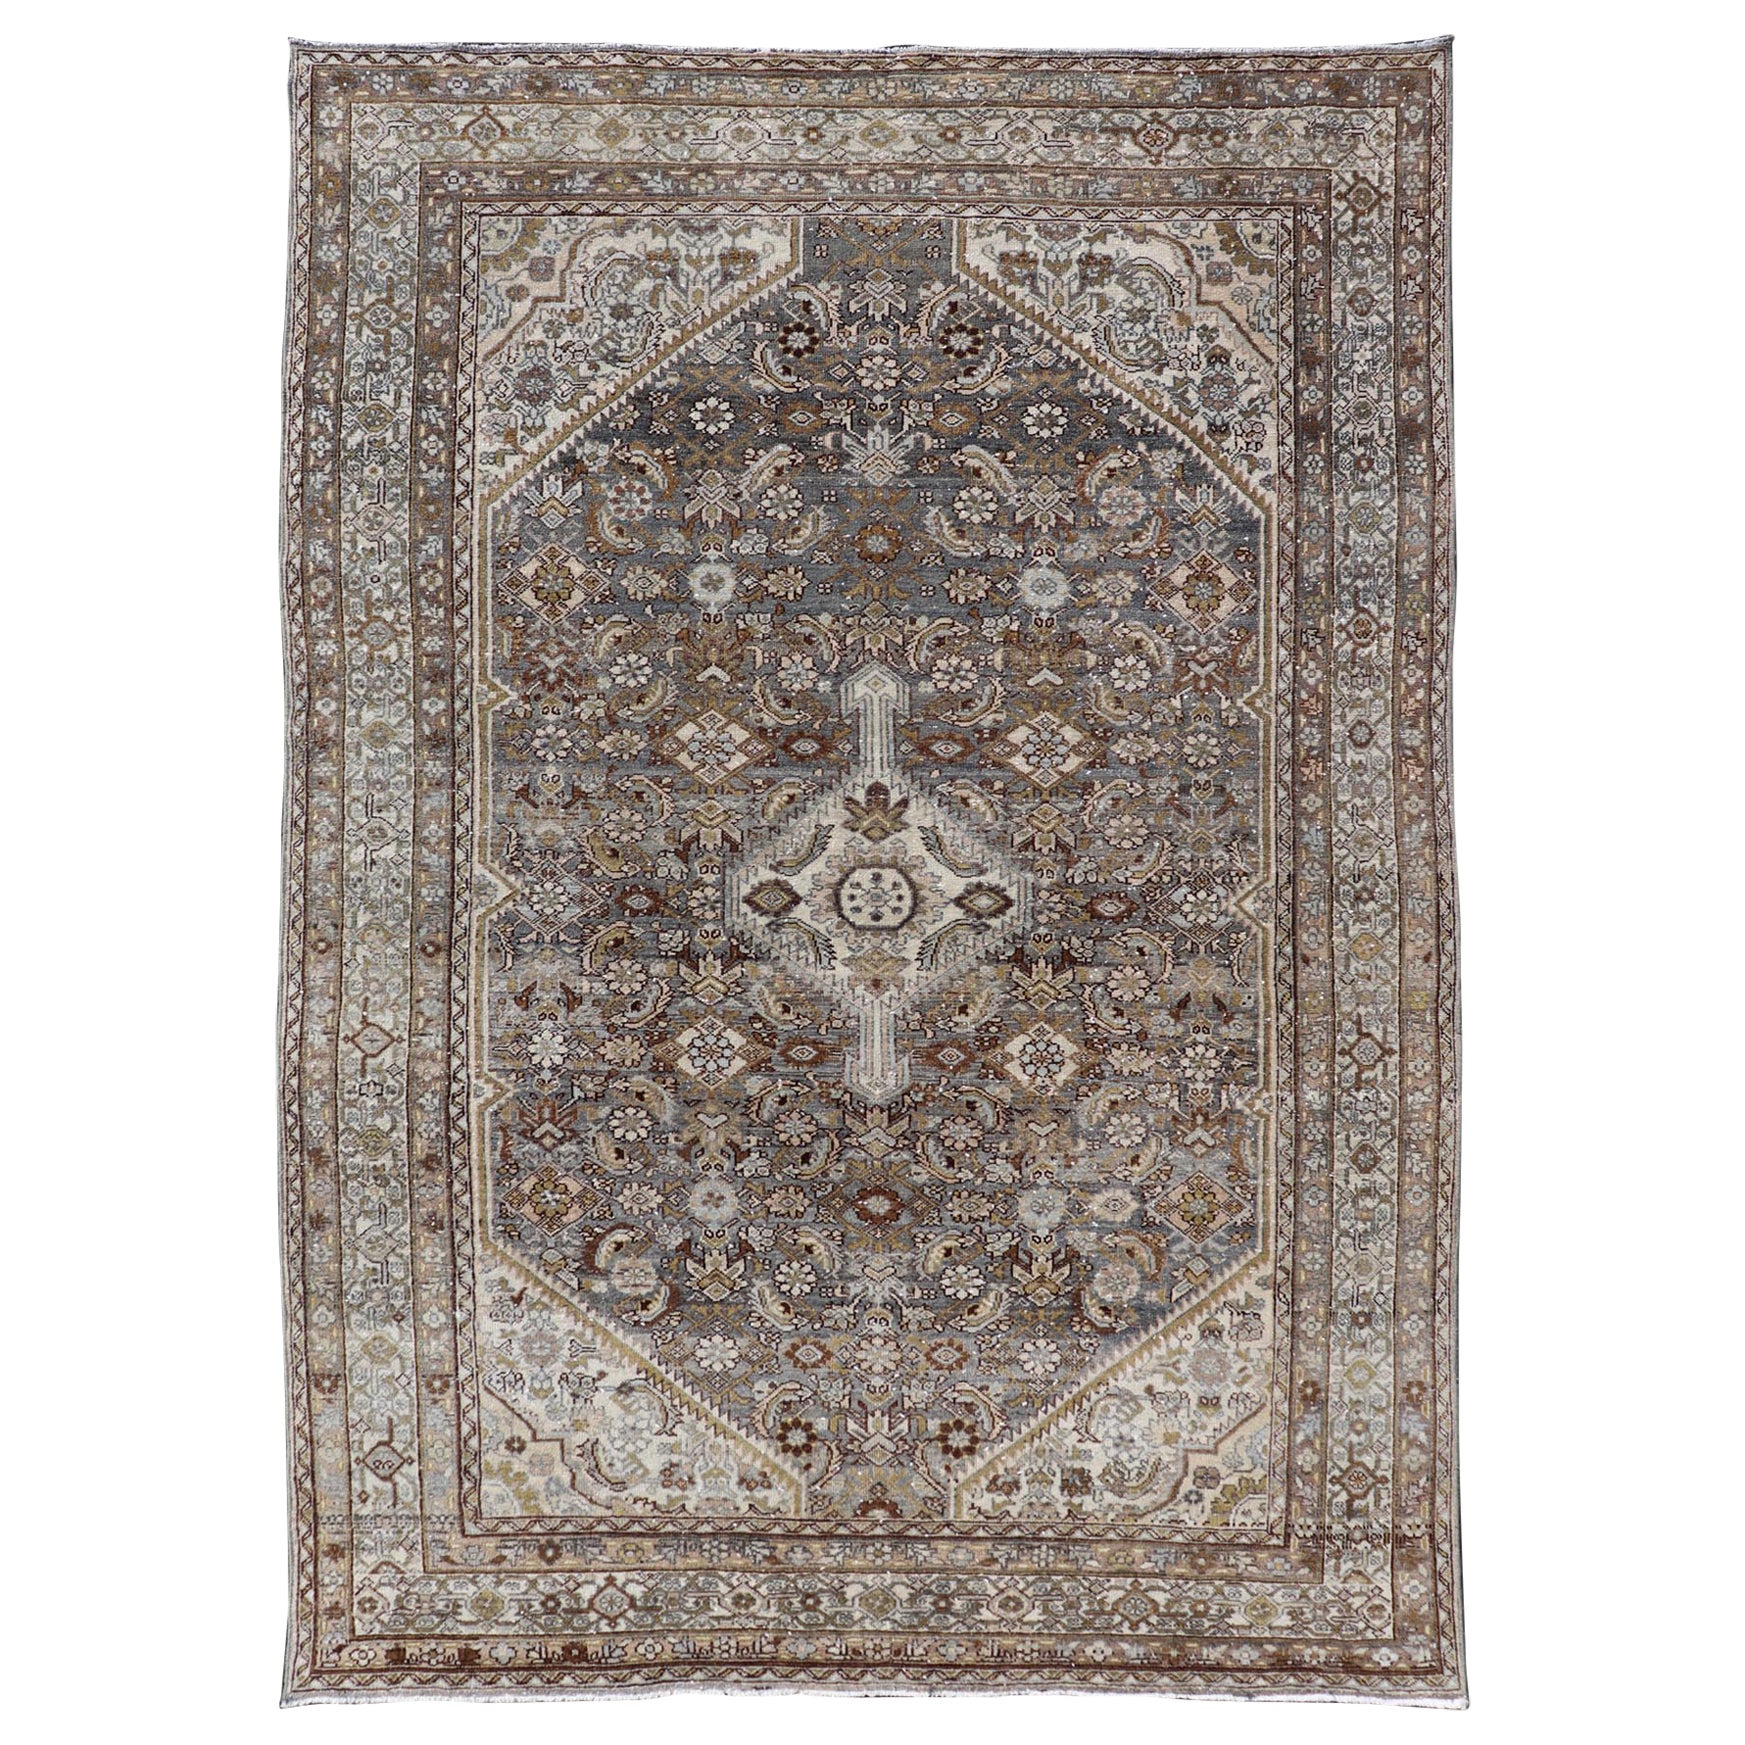 Antique Persian Bibikabad Carpet with Steal Blue, Charcoal, Green, and Brown  For Sale